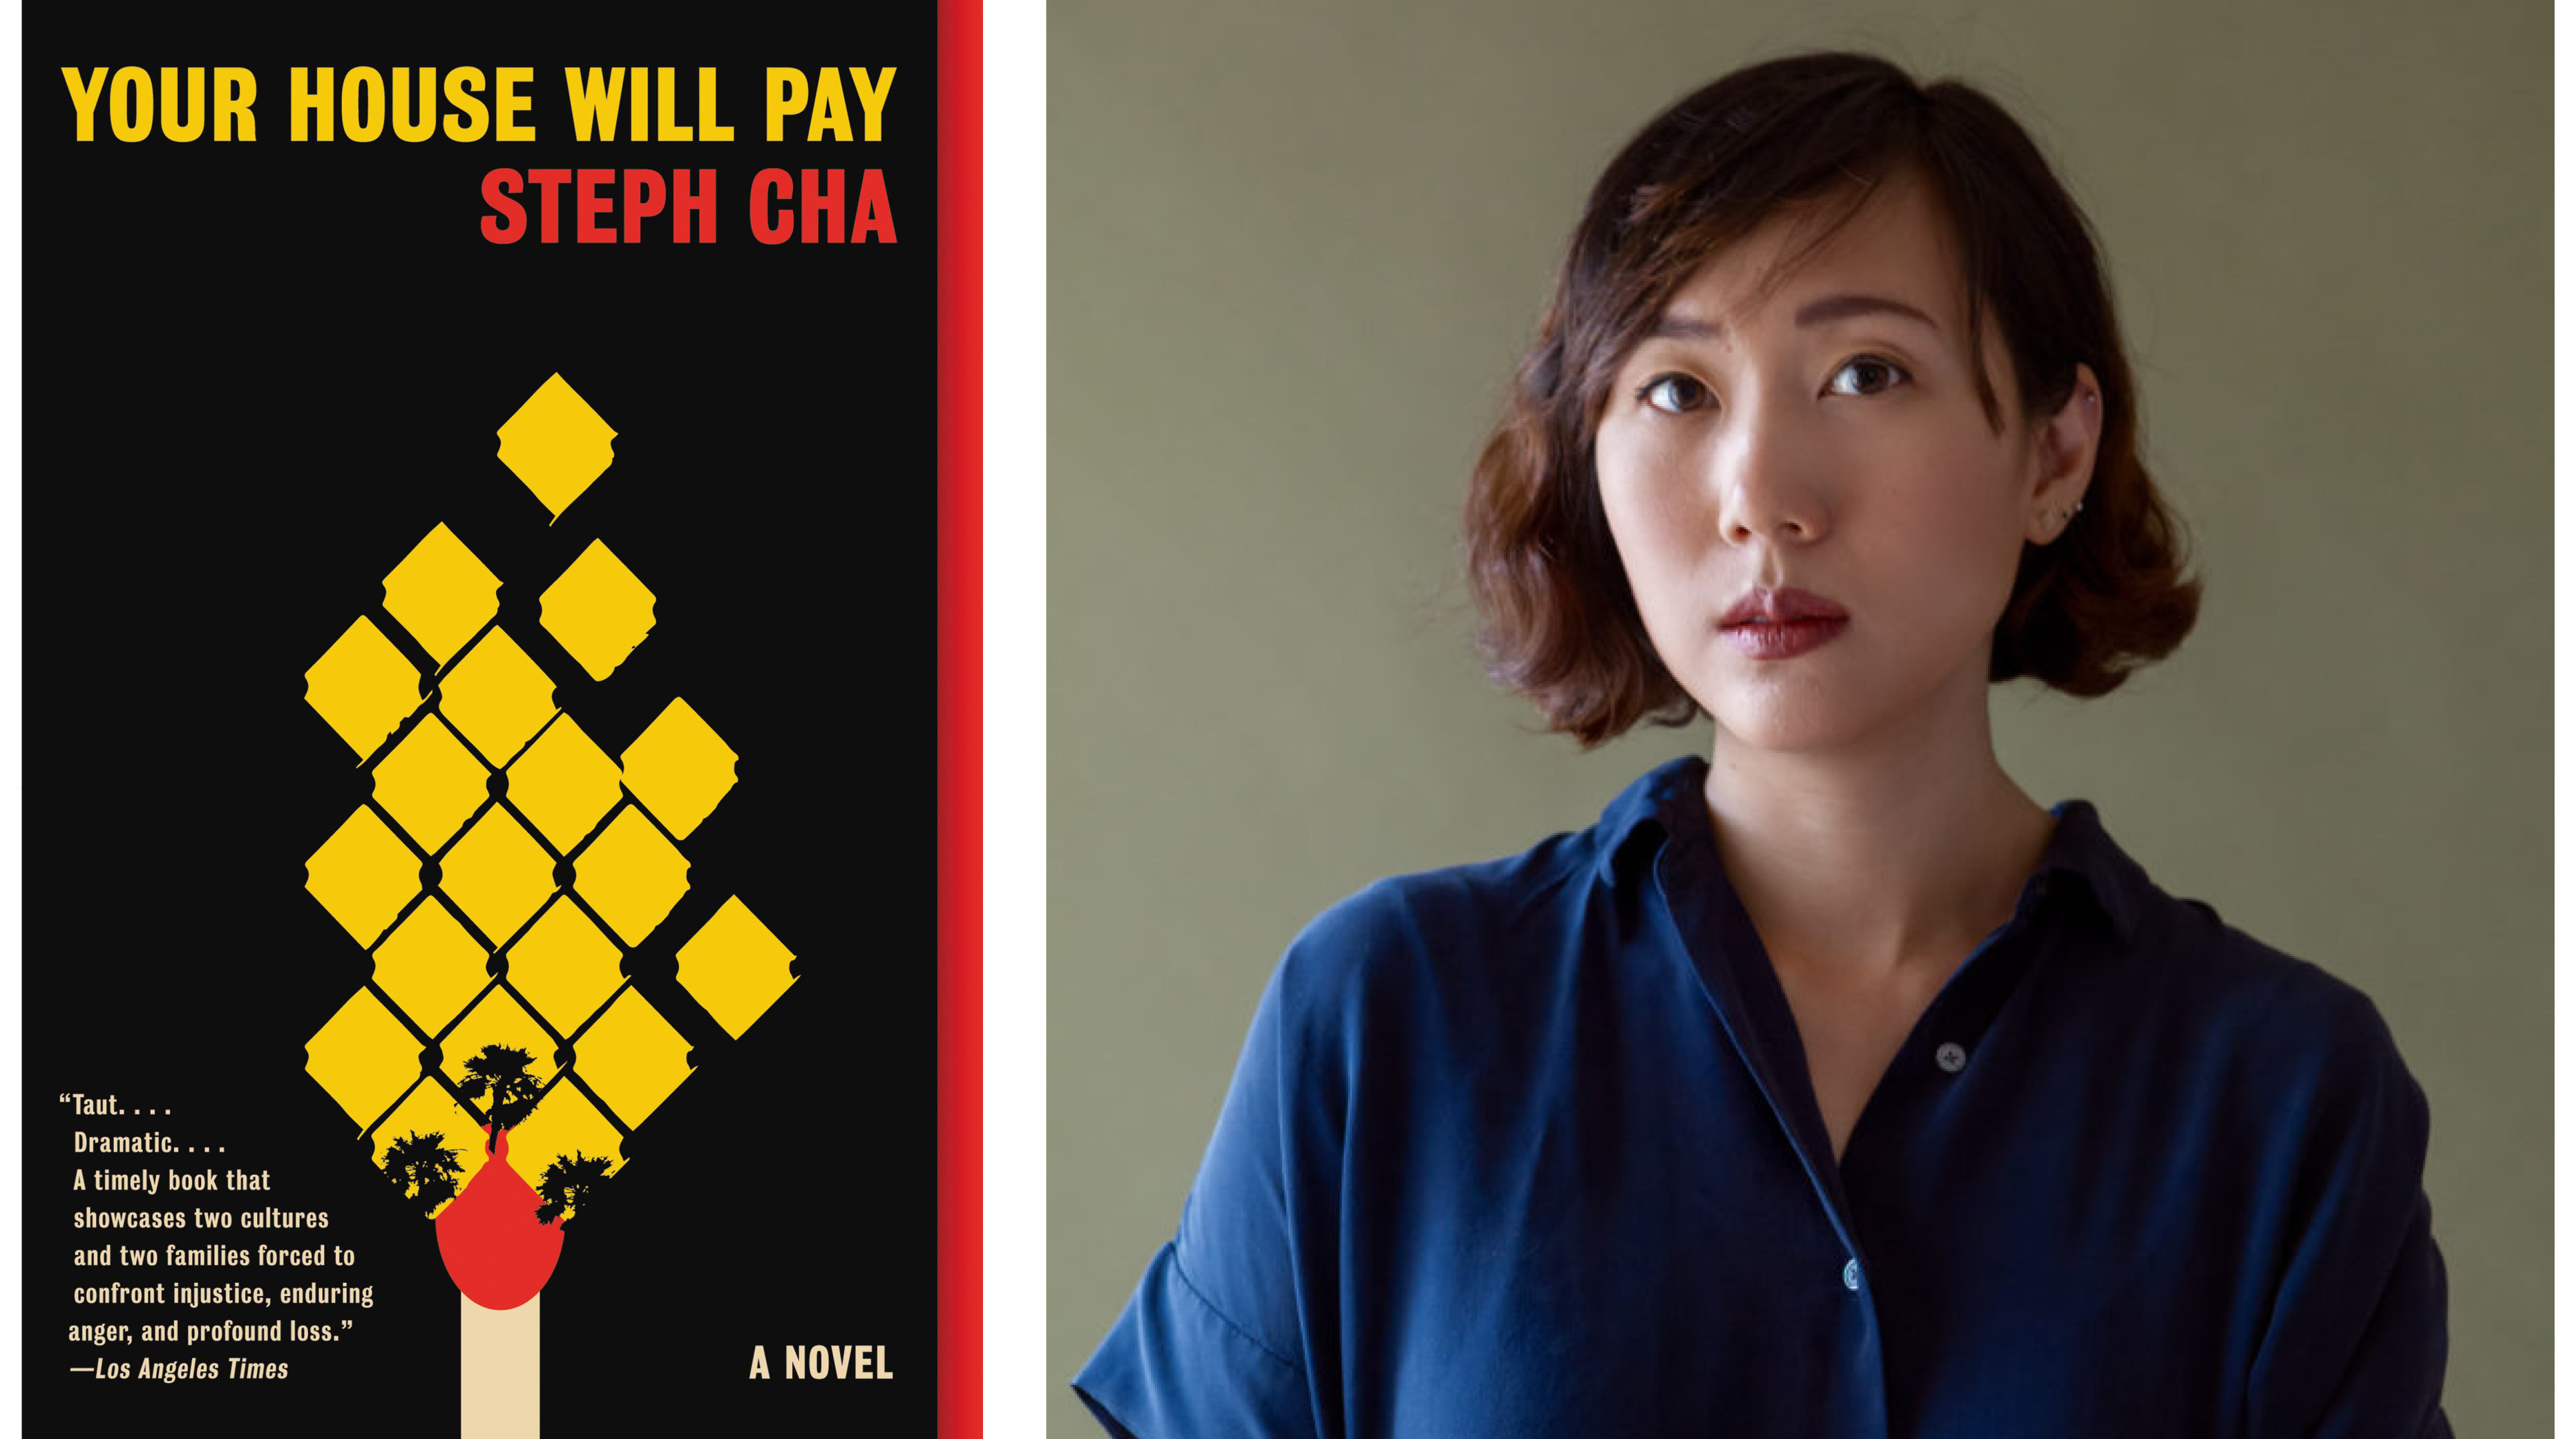 Steph Cha, author of Your House Will Pay